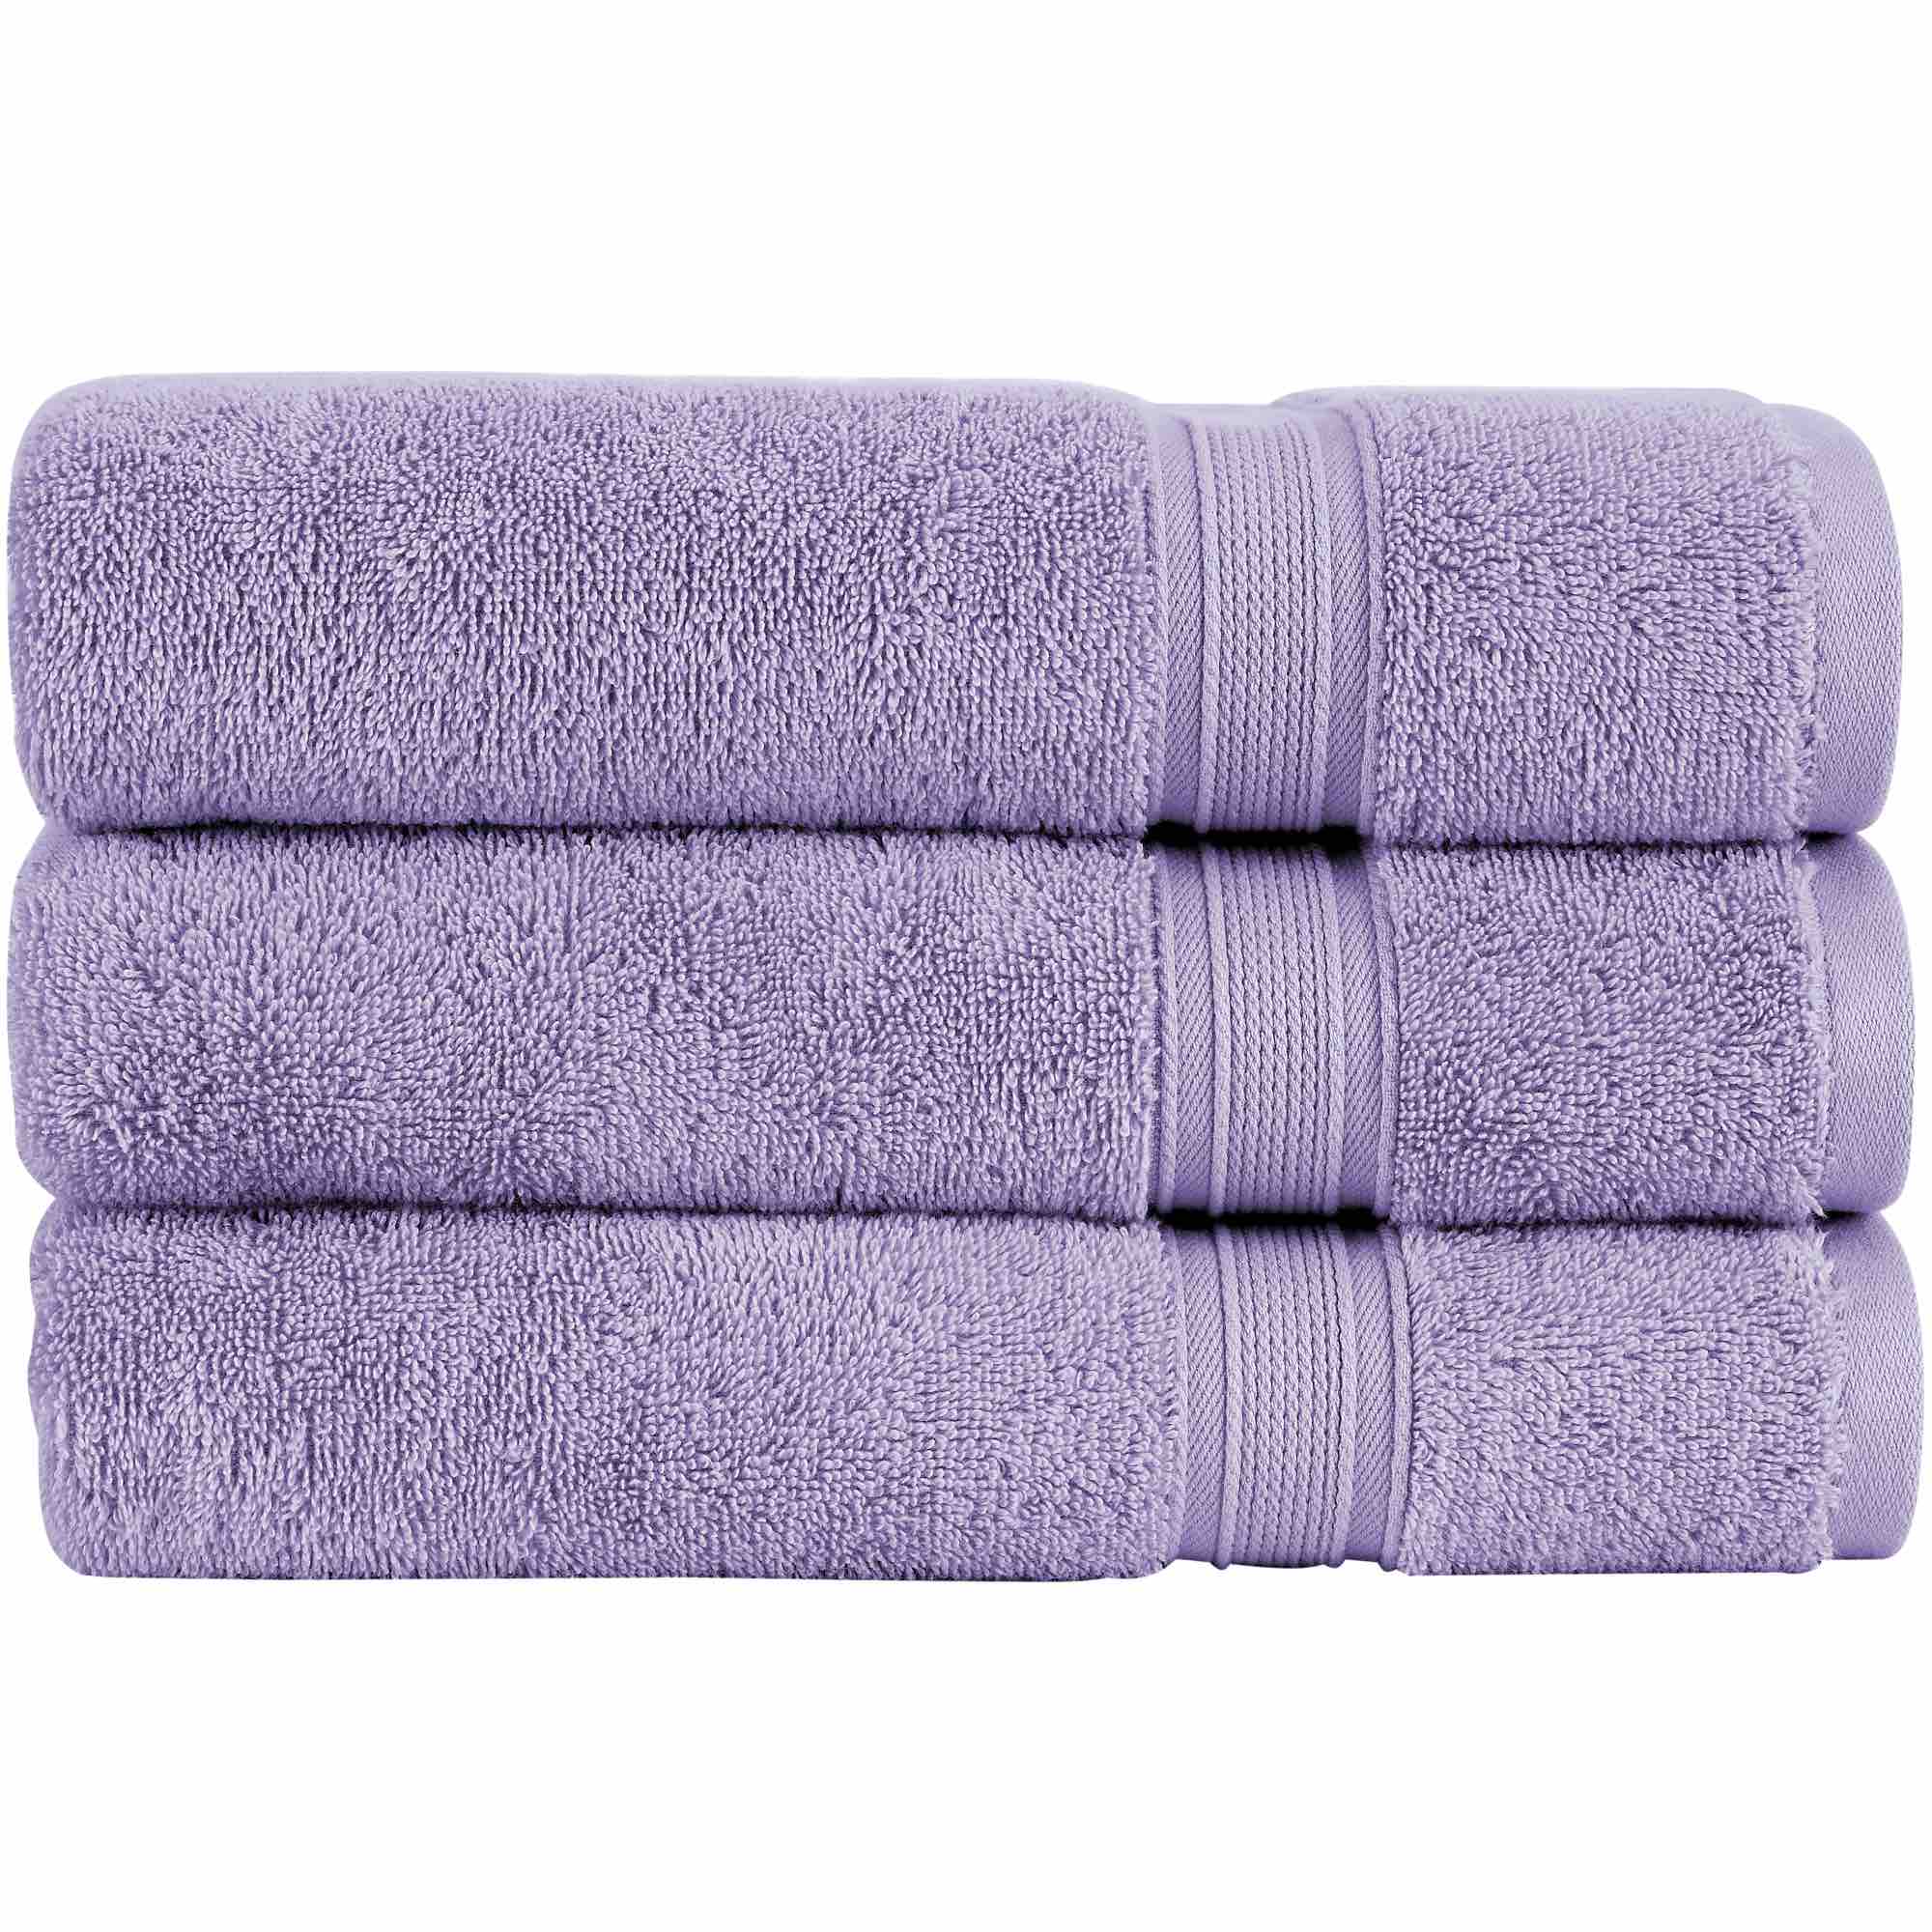 Christy Serene Combed Cotton Towel - Lilac Petal